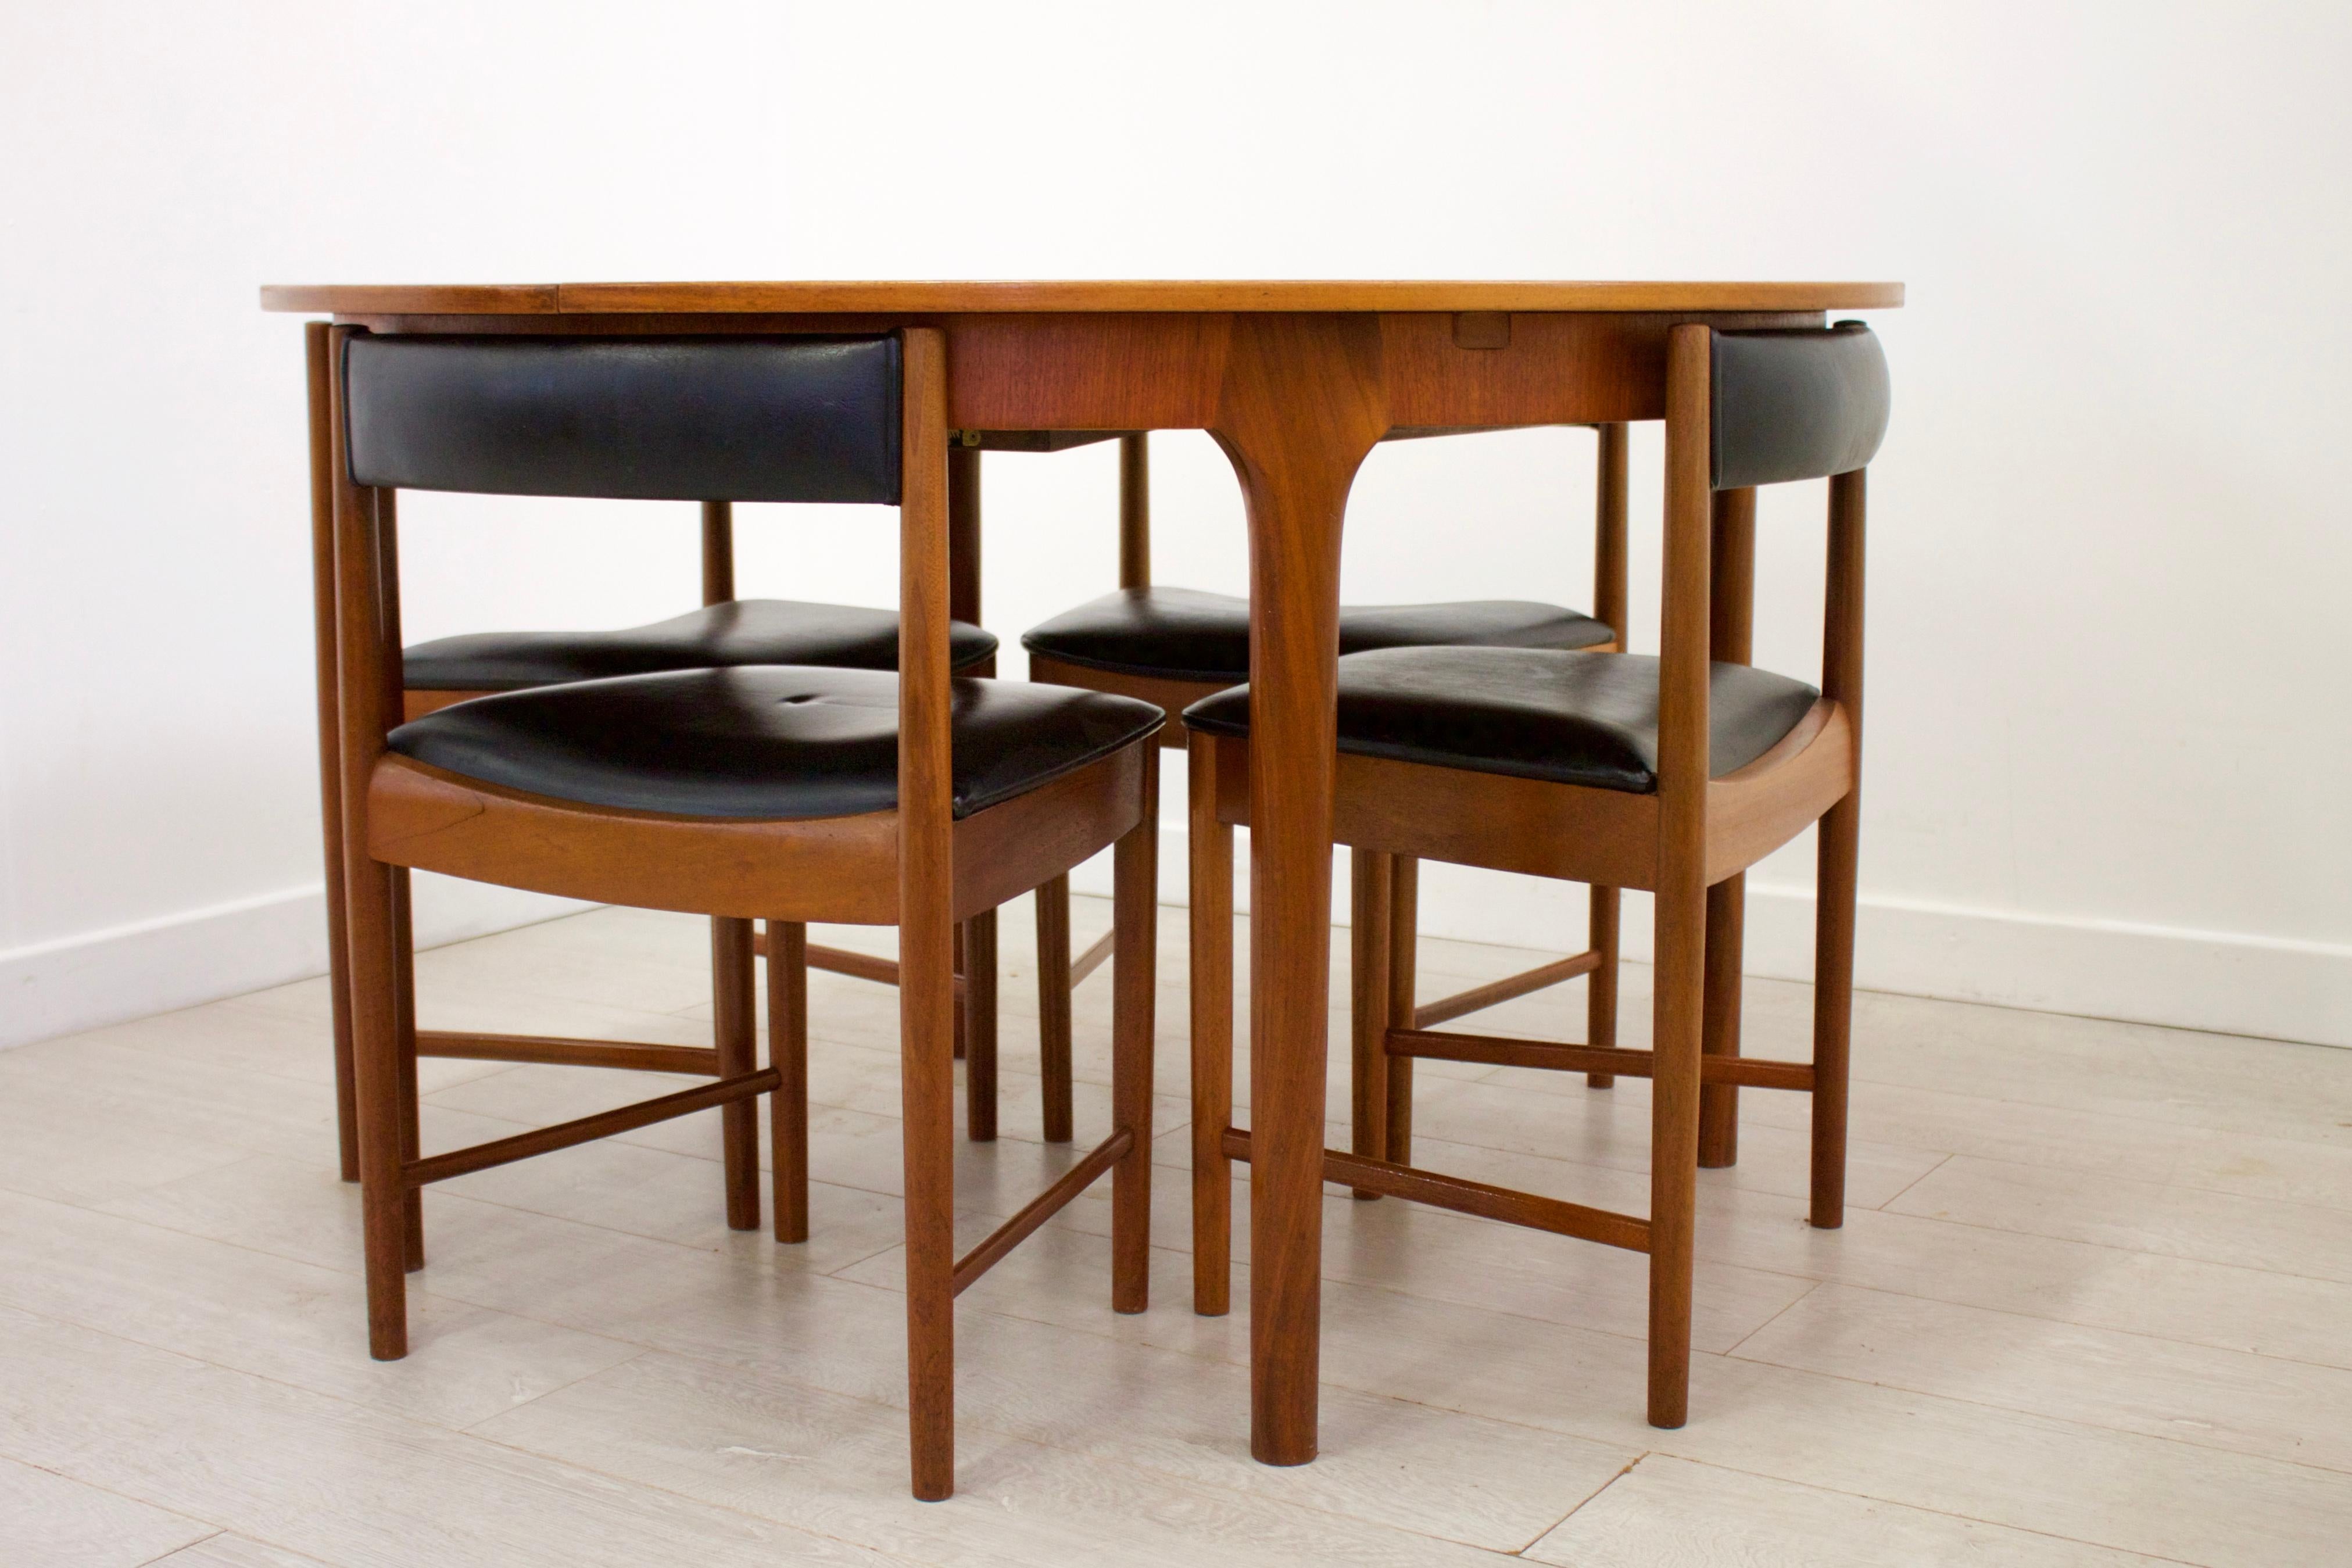 British Midcentury Teak Extendable Dining Table with 4 Chairs from McIntosh, 1960s